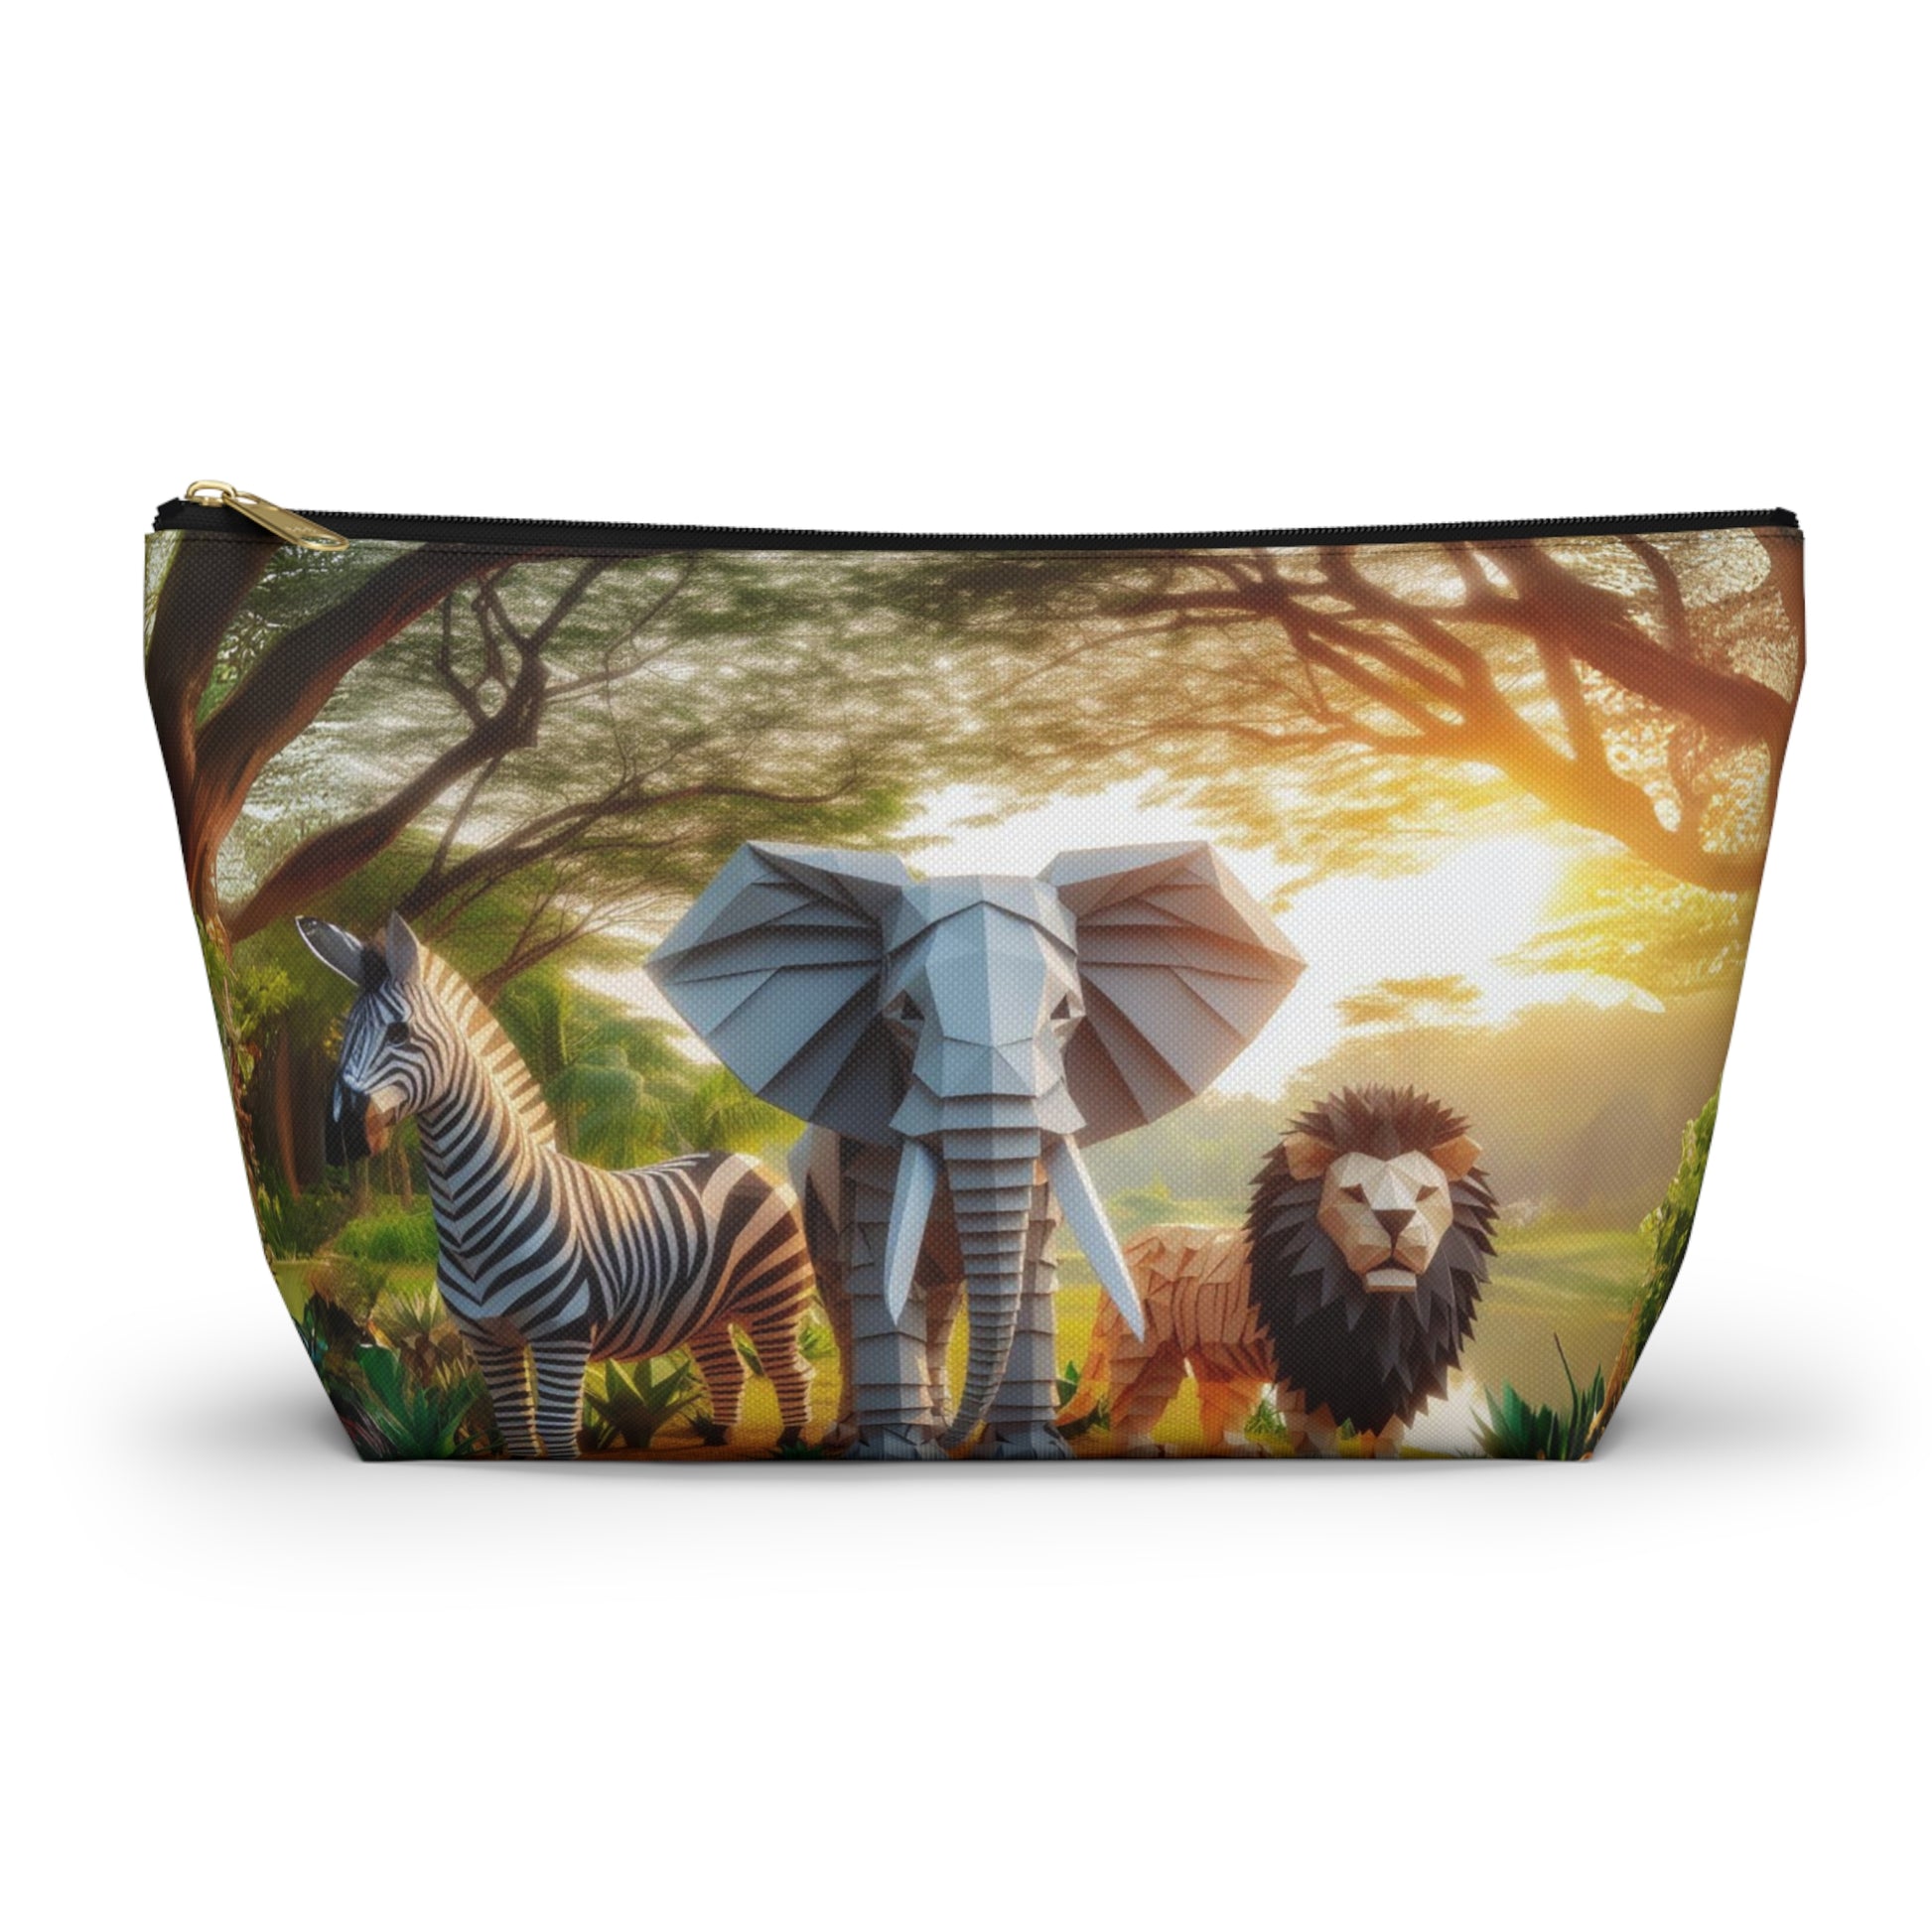 Everyday bag with T-bottom, perfect for accessories, makeup, technology or travel (Magic Jungle)